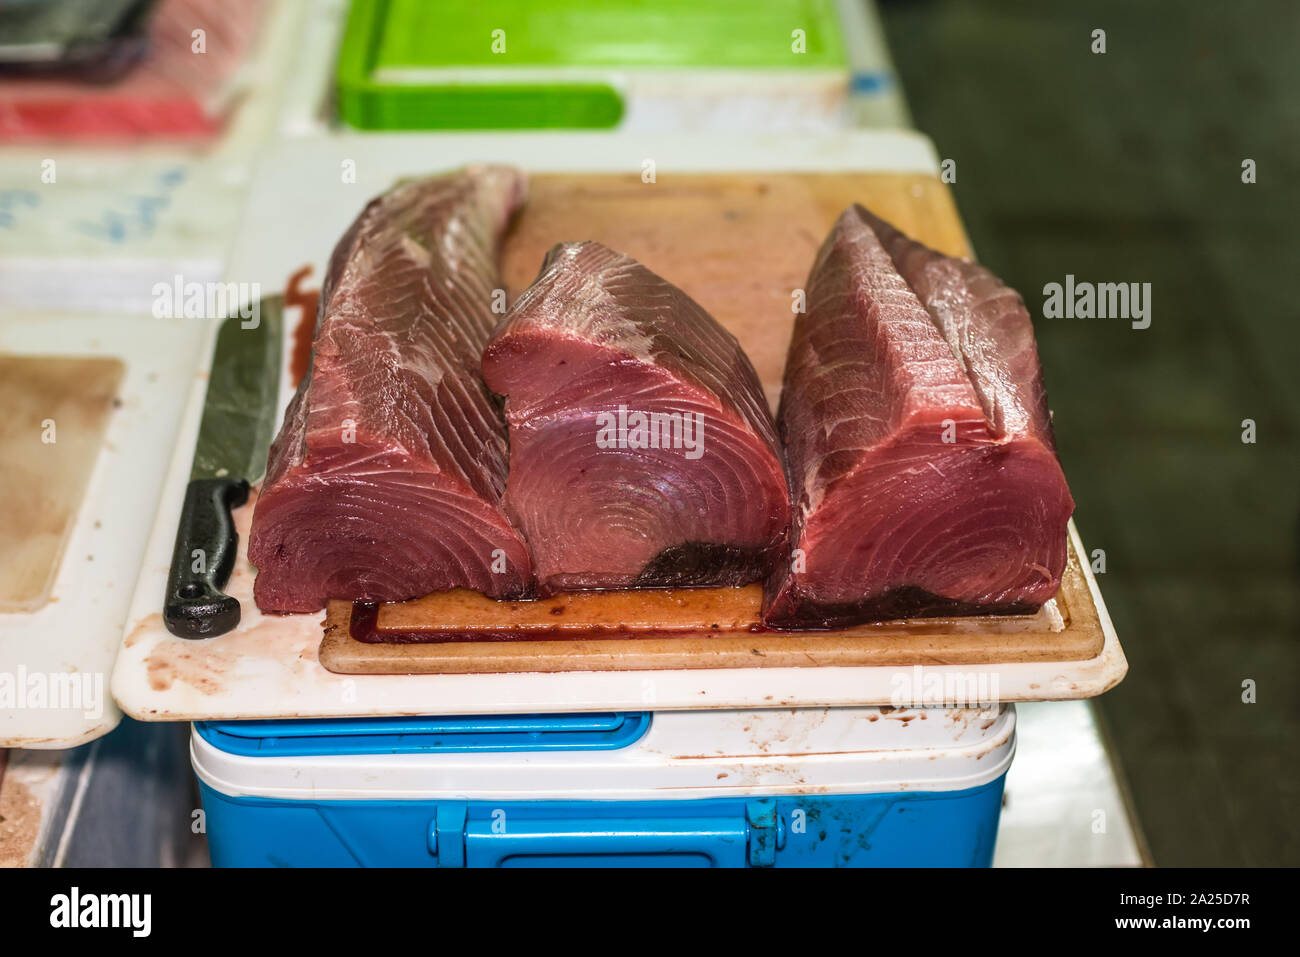 Image of Fisherman (Salesman) Is Cutting Fresh Tuna Fish In The Open Air  Fish Market Or Restaurant-YP686846-Picxy